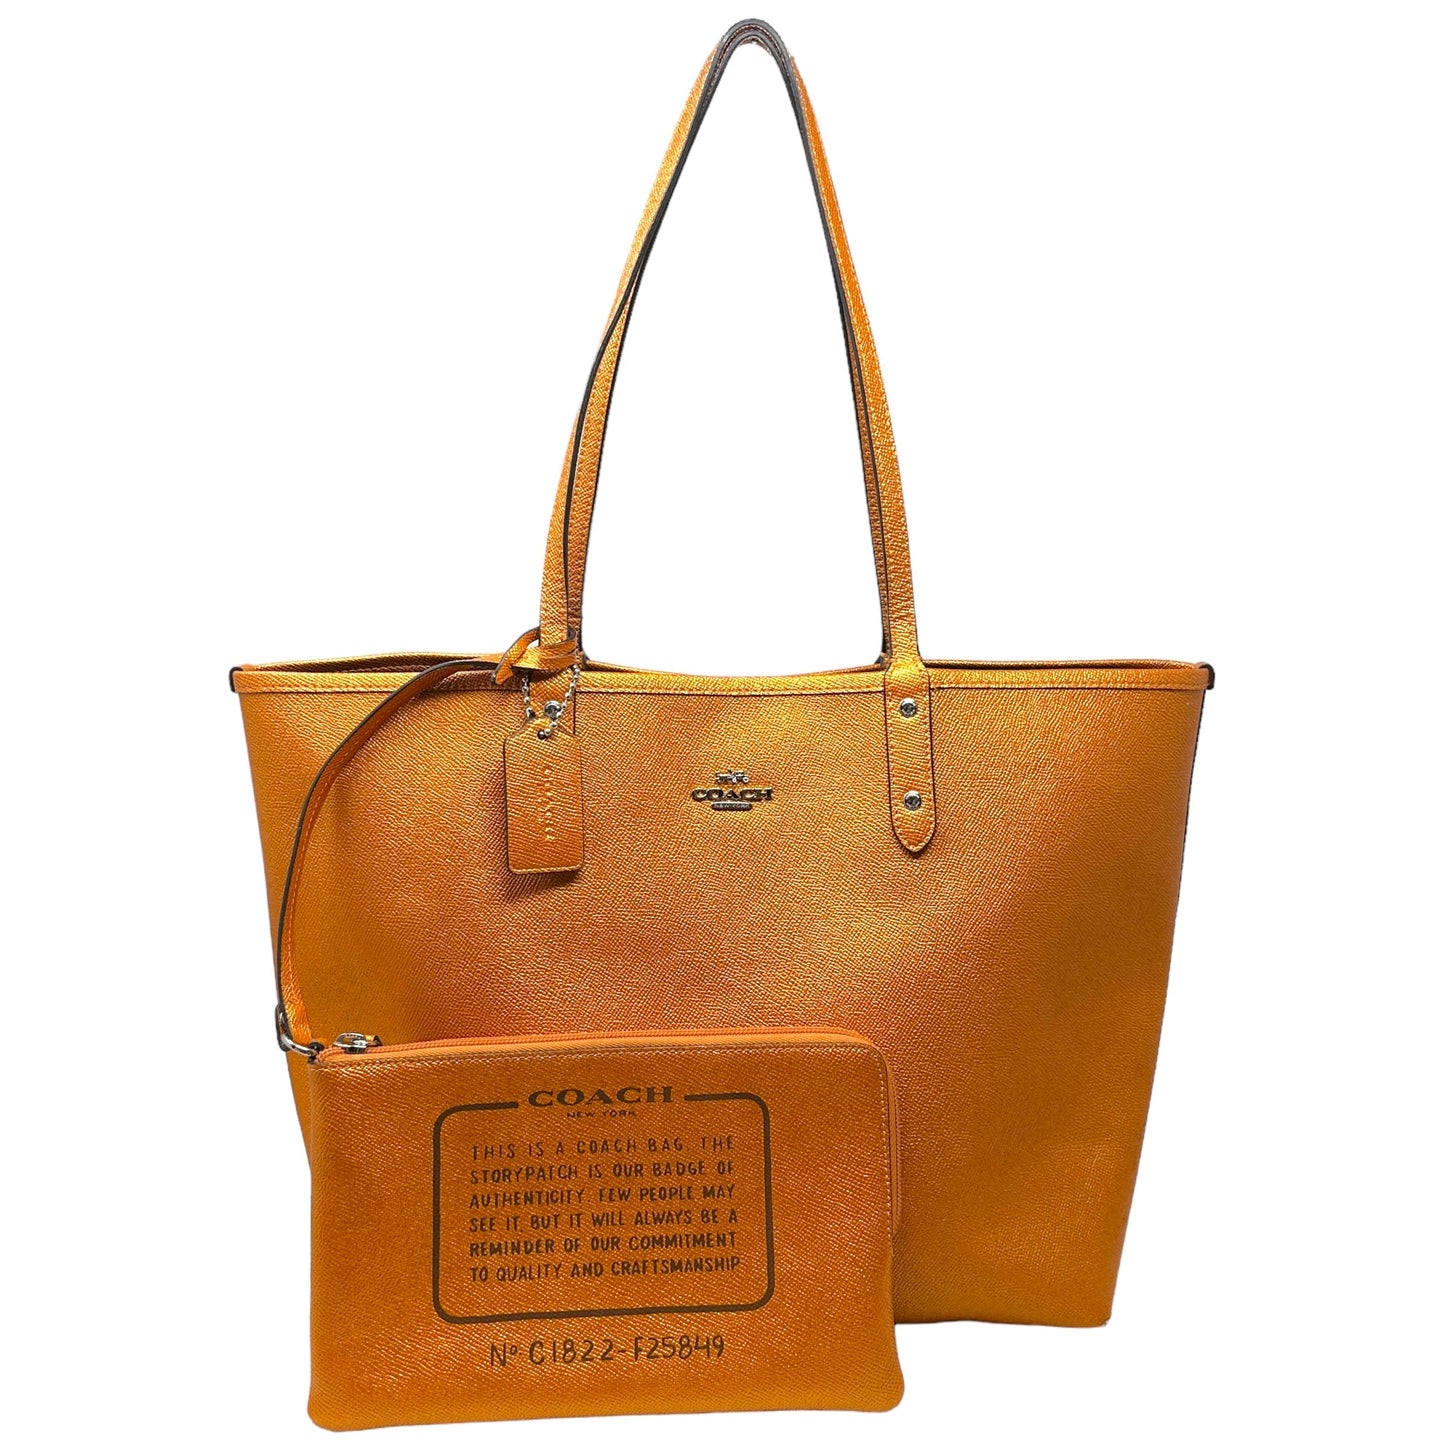 Reversible City Tote with Pouch -Signature Canvas Khaki/Metallic Tangerine Designer By Coach  Size: Large